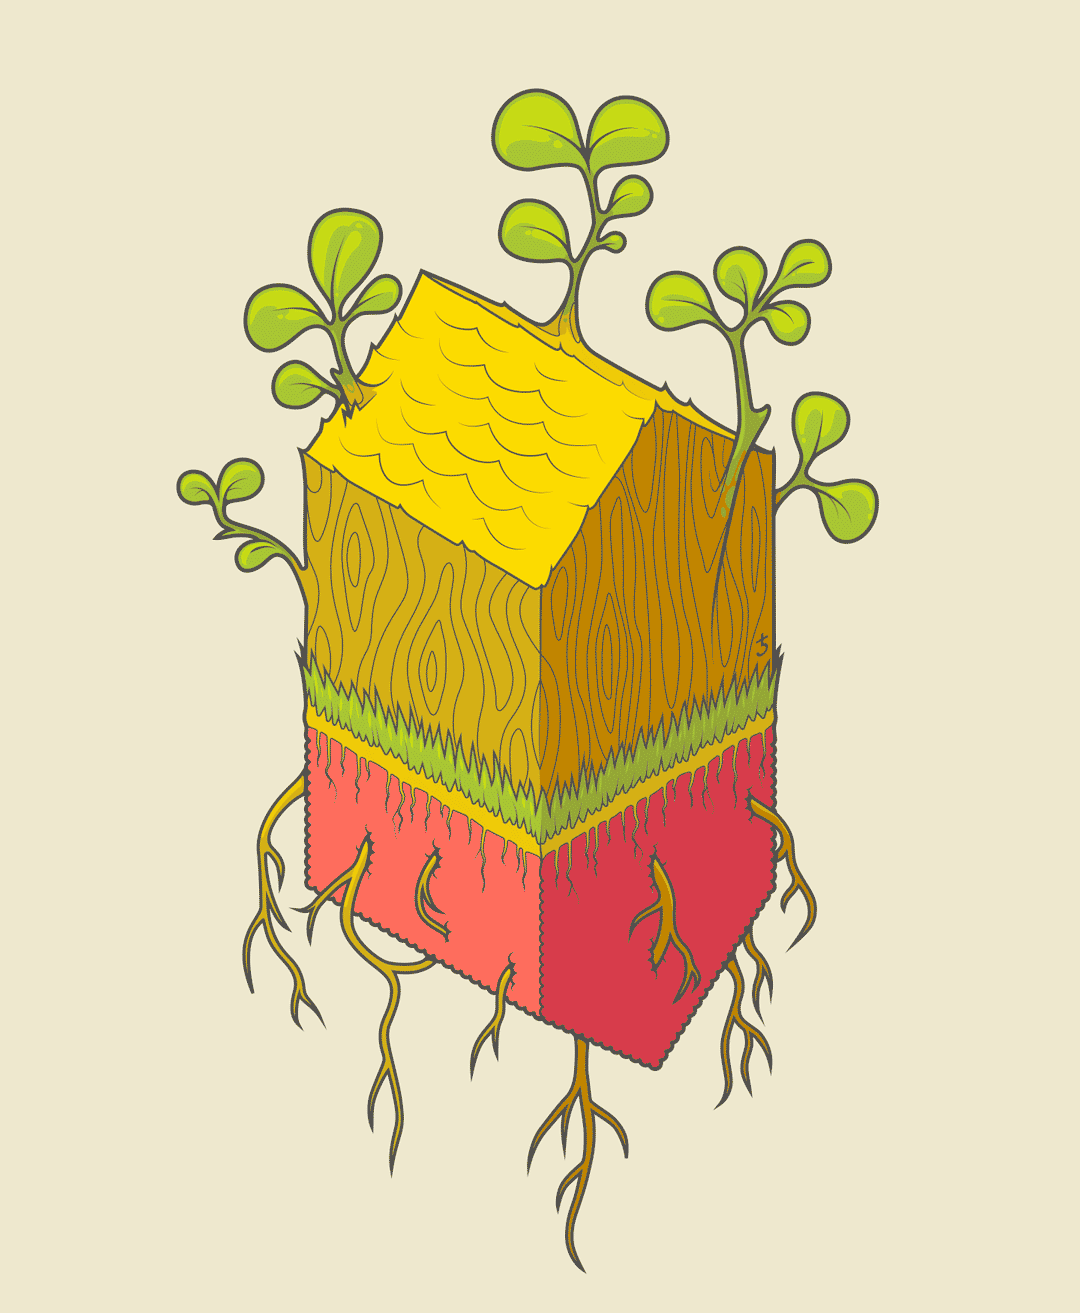 illustration_andre_levy_zhion_vector_roots_work_life_balance_home_plant_growth.gif